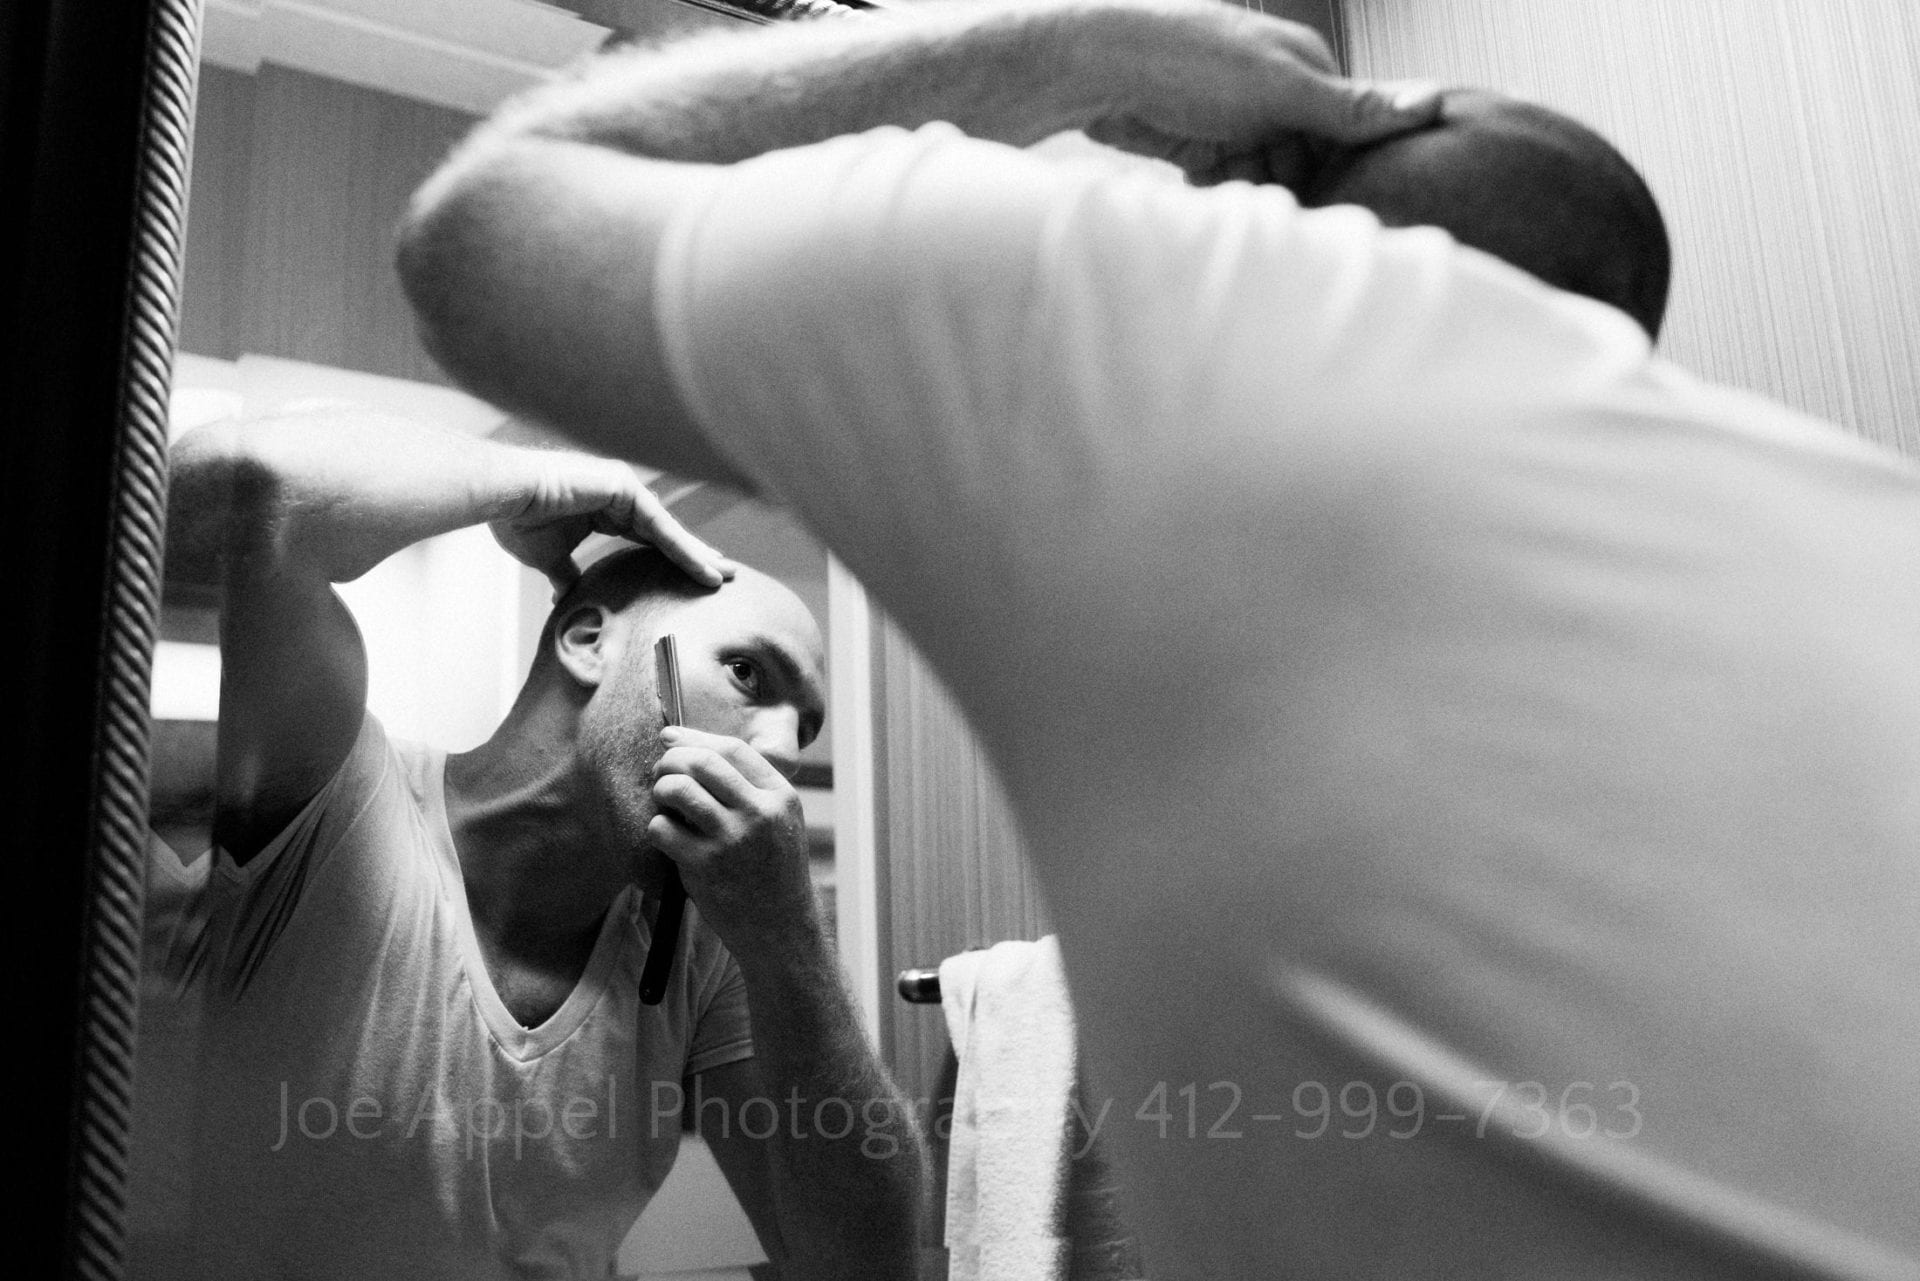 A man wearing a v-neck t-shirt looks in a mirror as he trims his beard with a straight razor.